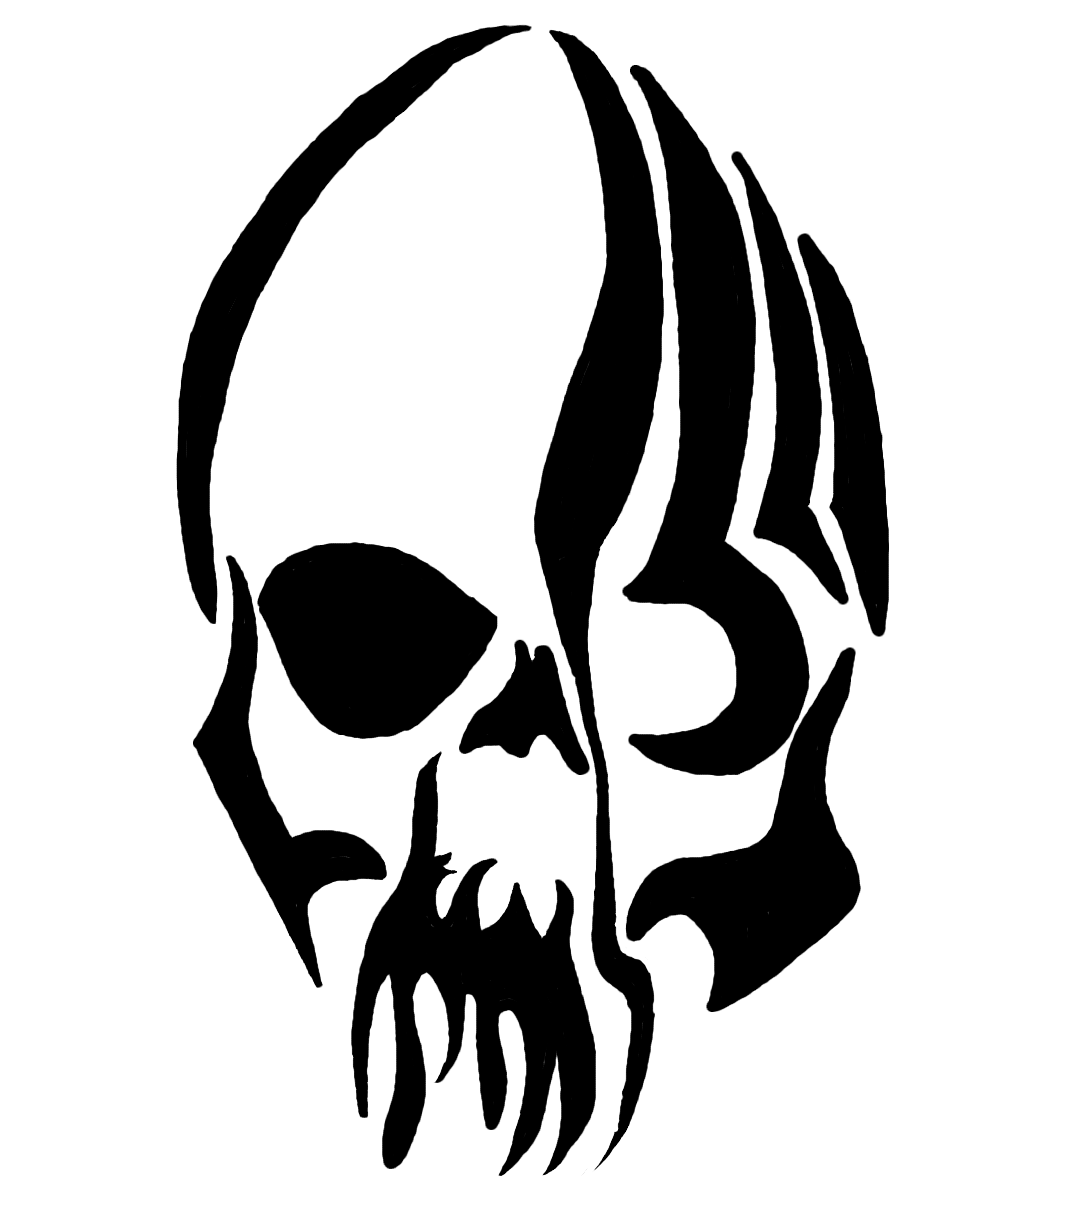 Human Skull Tattoo Free Vector And Graphic 52546210